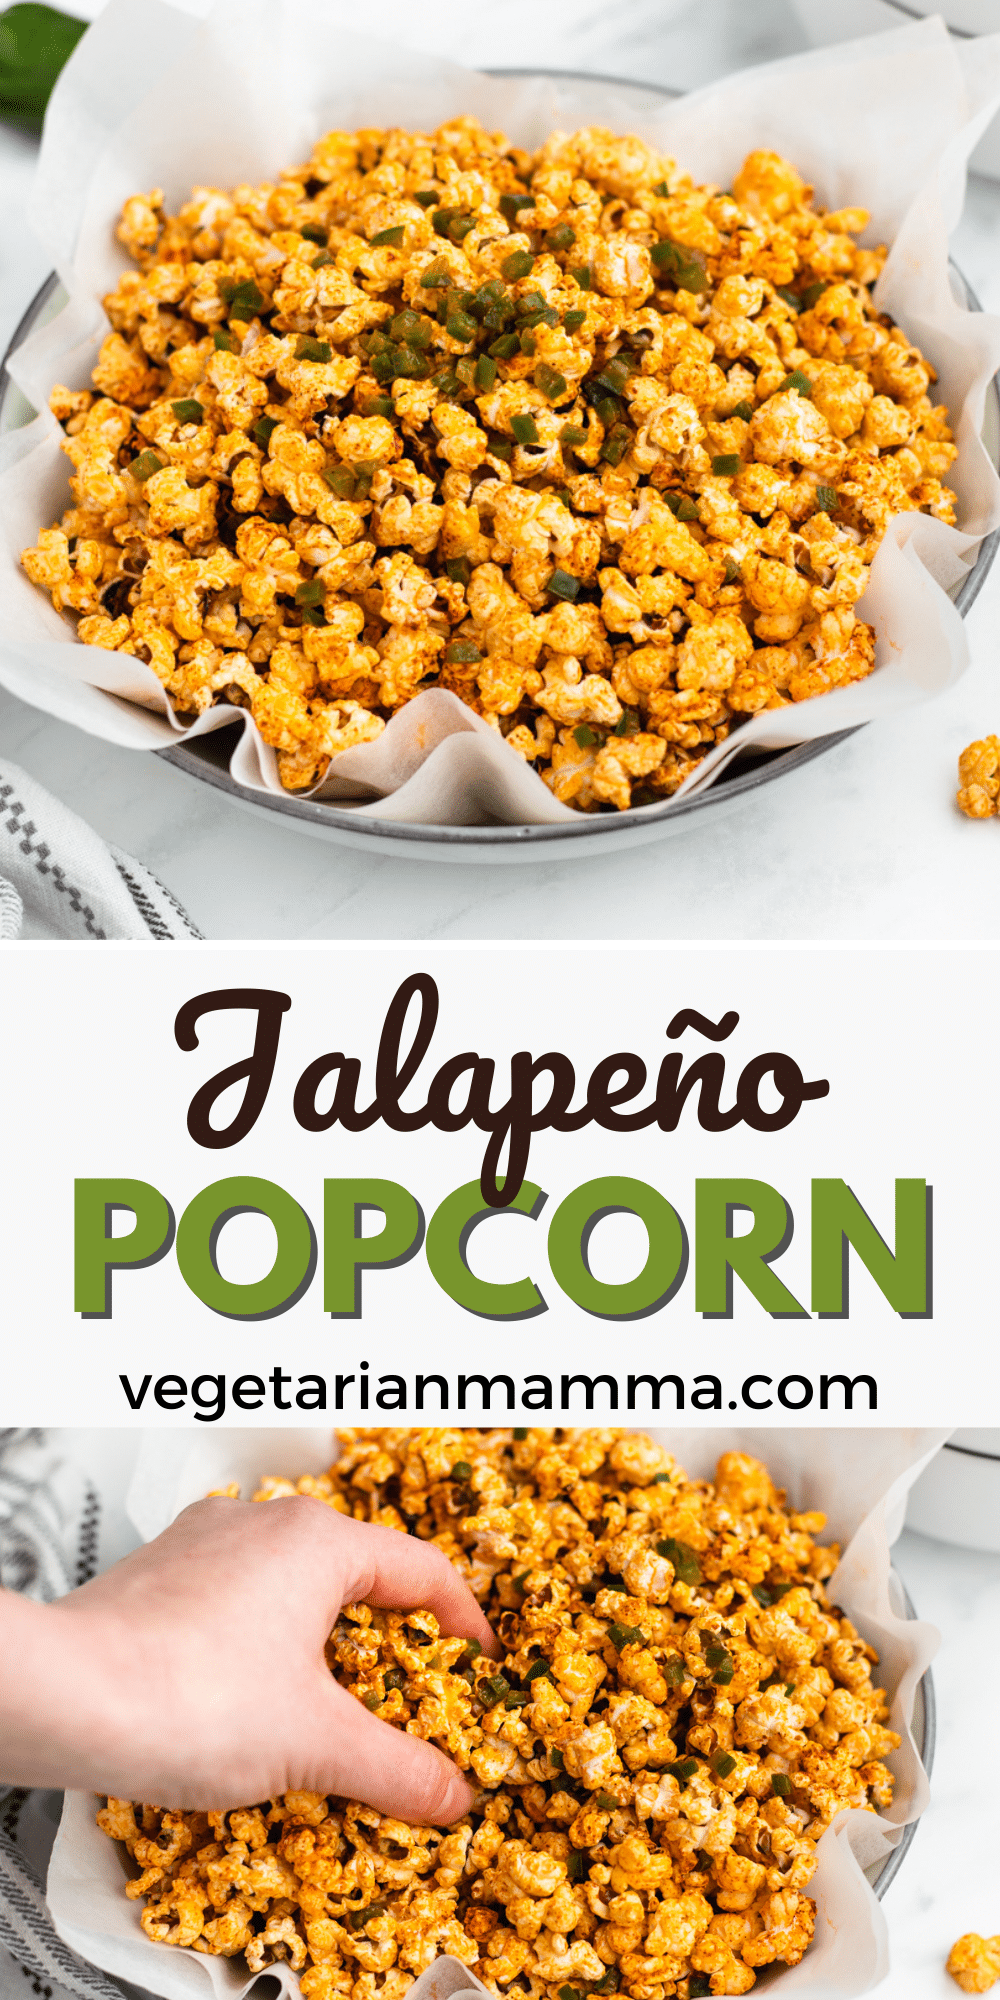 Homemade Jalapeno popcorn topped with a spicy, buttery coating and fresh jalapeno peppers is the most delicious snack for a movie night.